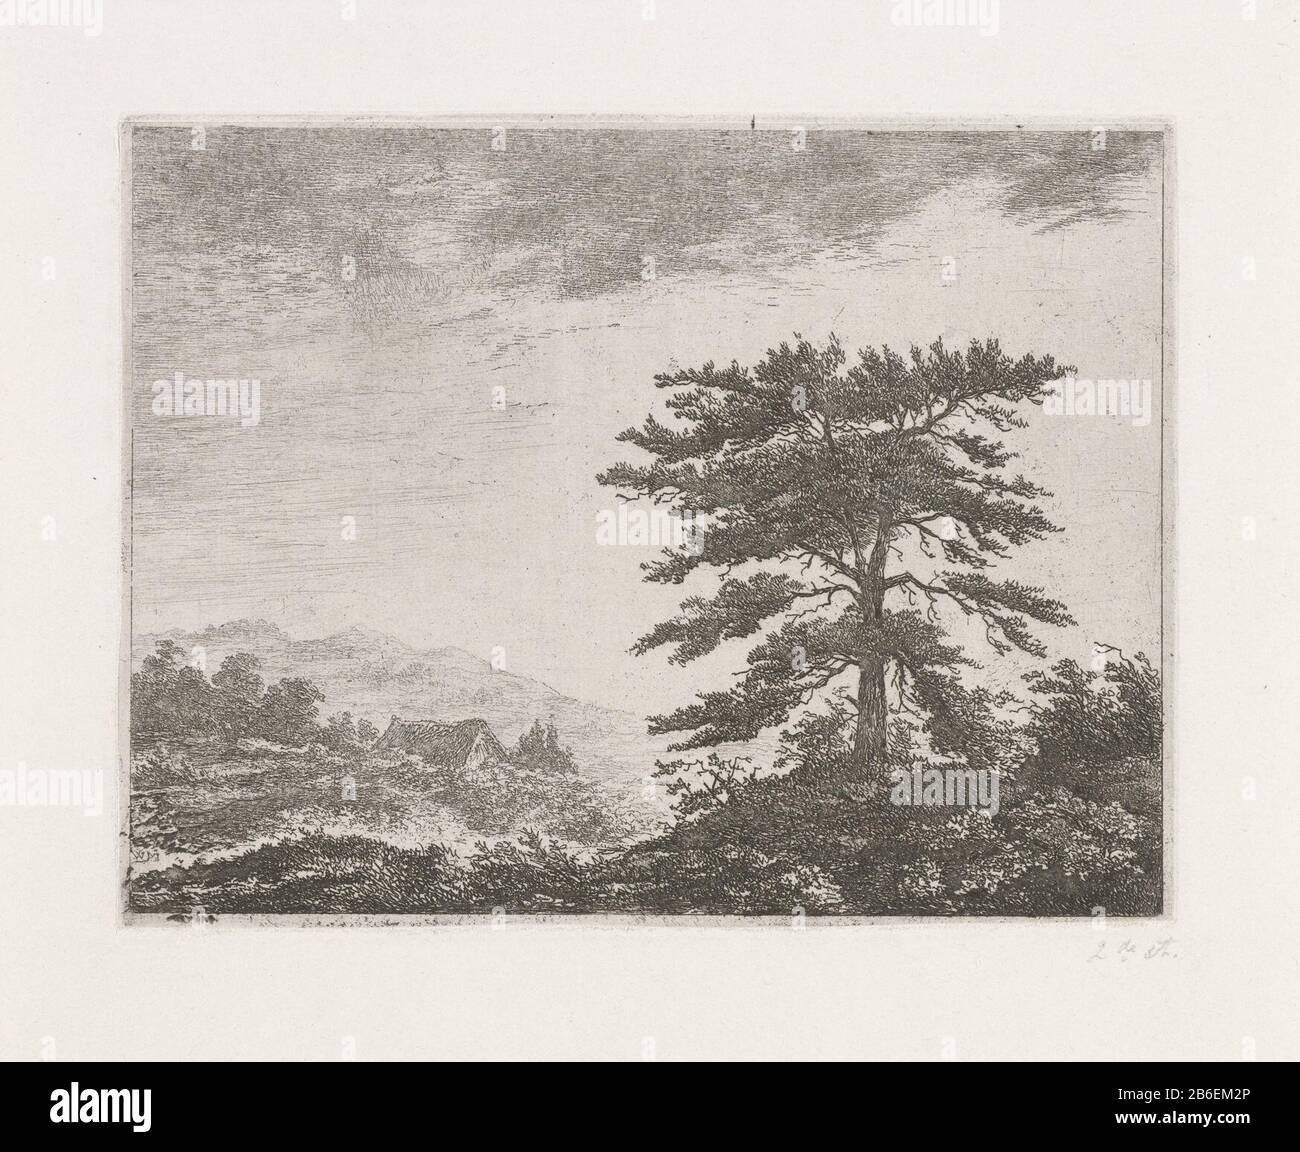 Tree in a heath a tree in a hilly moorland. Left the roof of a huis. Manufacturer : printmaker Christiaan Wilhelmus Moorrees (listed building) in its design: Christiaan Wilhelmus Moorrees Place manufacture: Netherlands Date: 1811 - 1867 Physical features: etching on chine collé Material: paper chine collé Technique: etching Dimensions: plate edge: h 126 mm × W 163 mm Subject: shrubs: broom tree Stock Photo